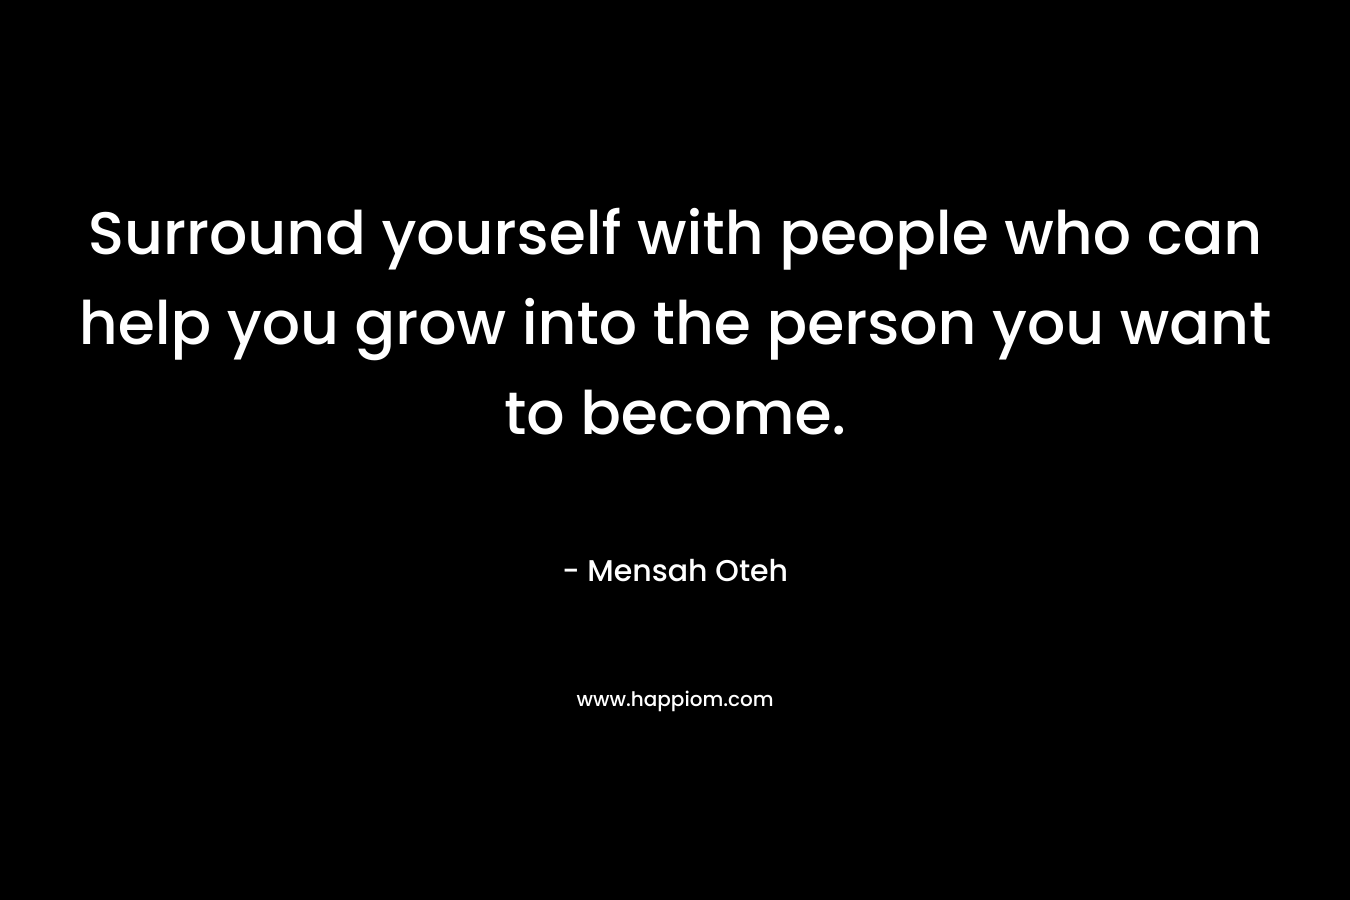 Surround yourself with people who can help you grow into the person you want to become.